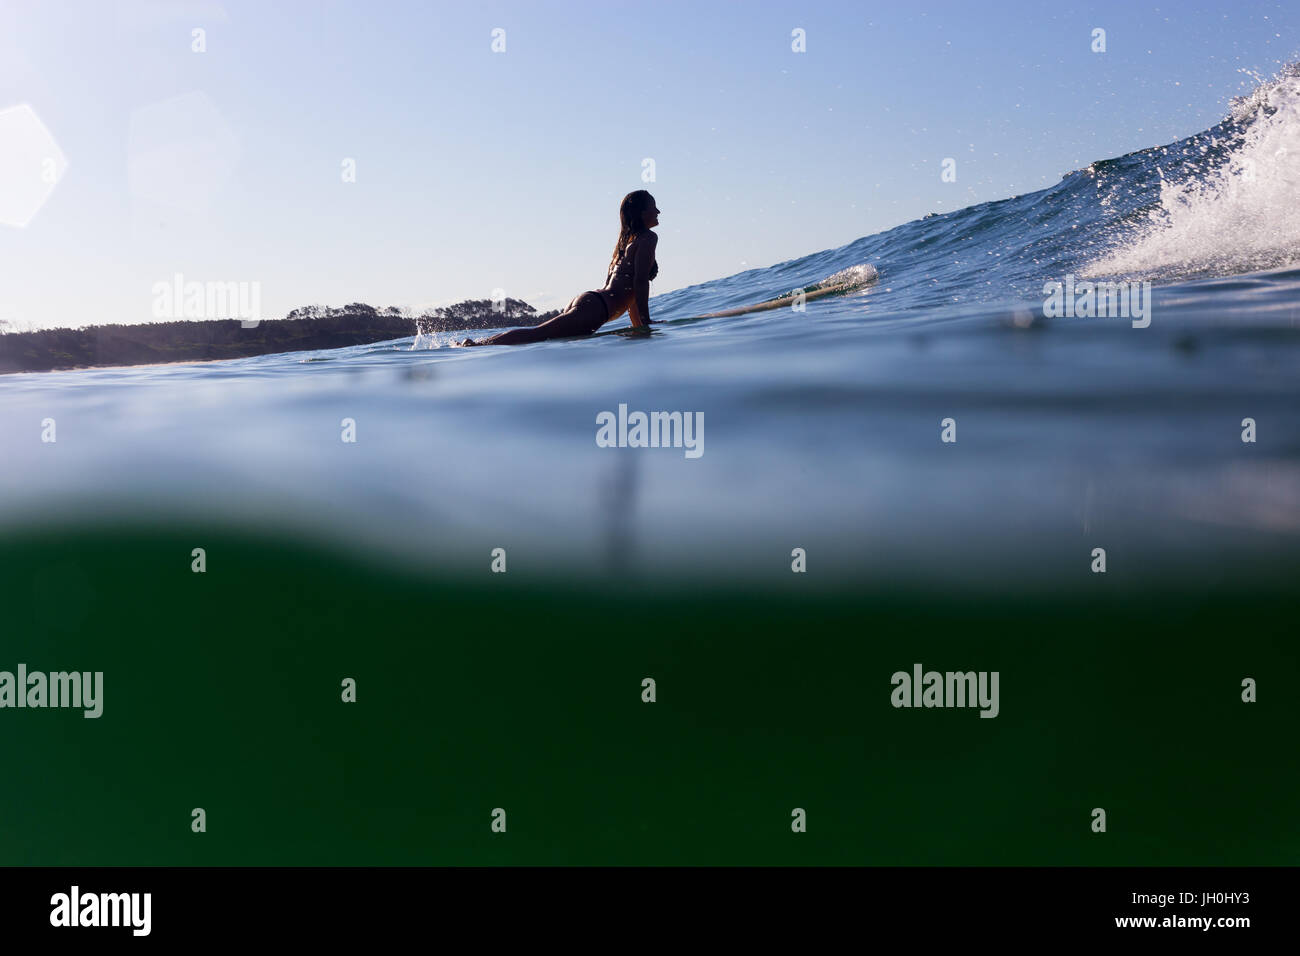 A surfer is back lit by the evening light as she paddles over a cresting wave. Stock Photo